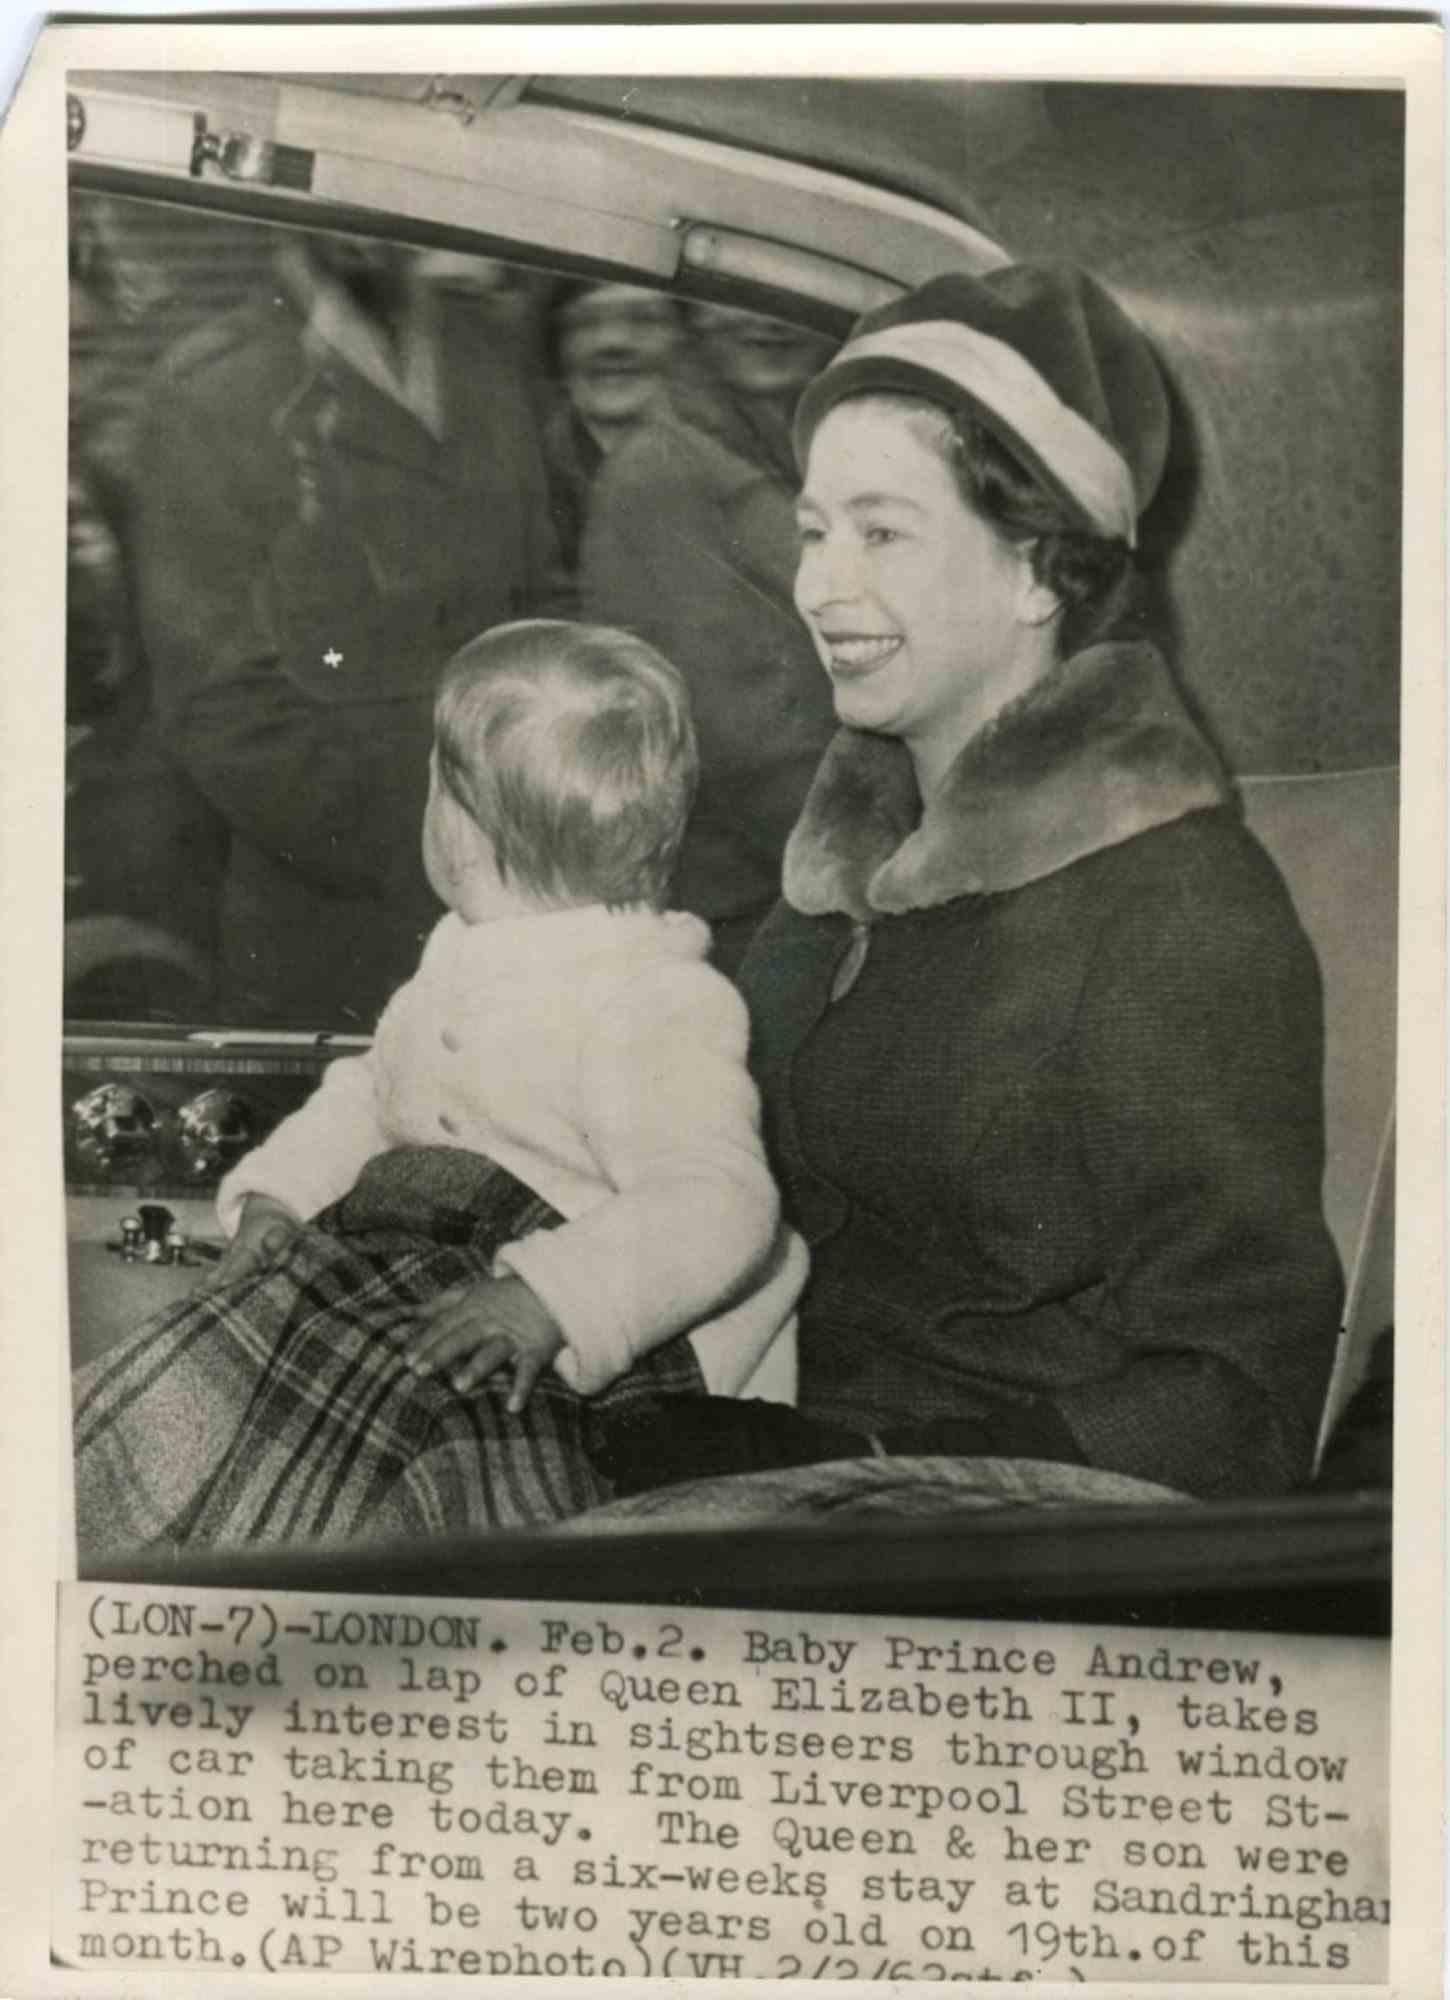 Unknown Black and White Photograph - Queen Elizabeth II with Baby Prince Andrew - Vintage Photograph - 1962